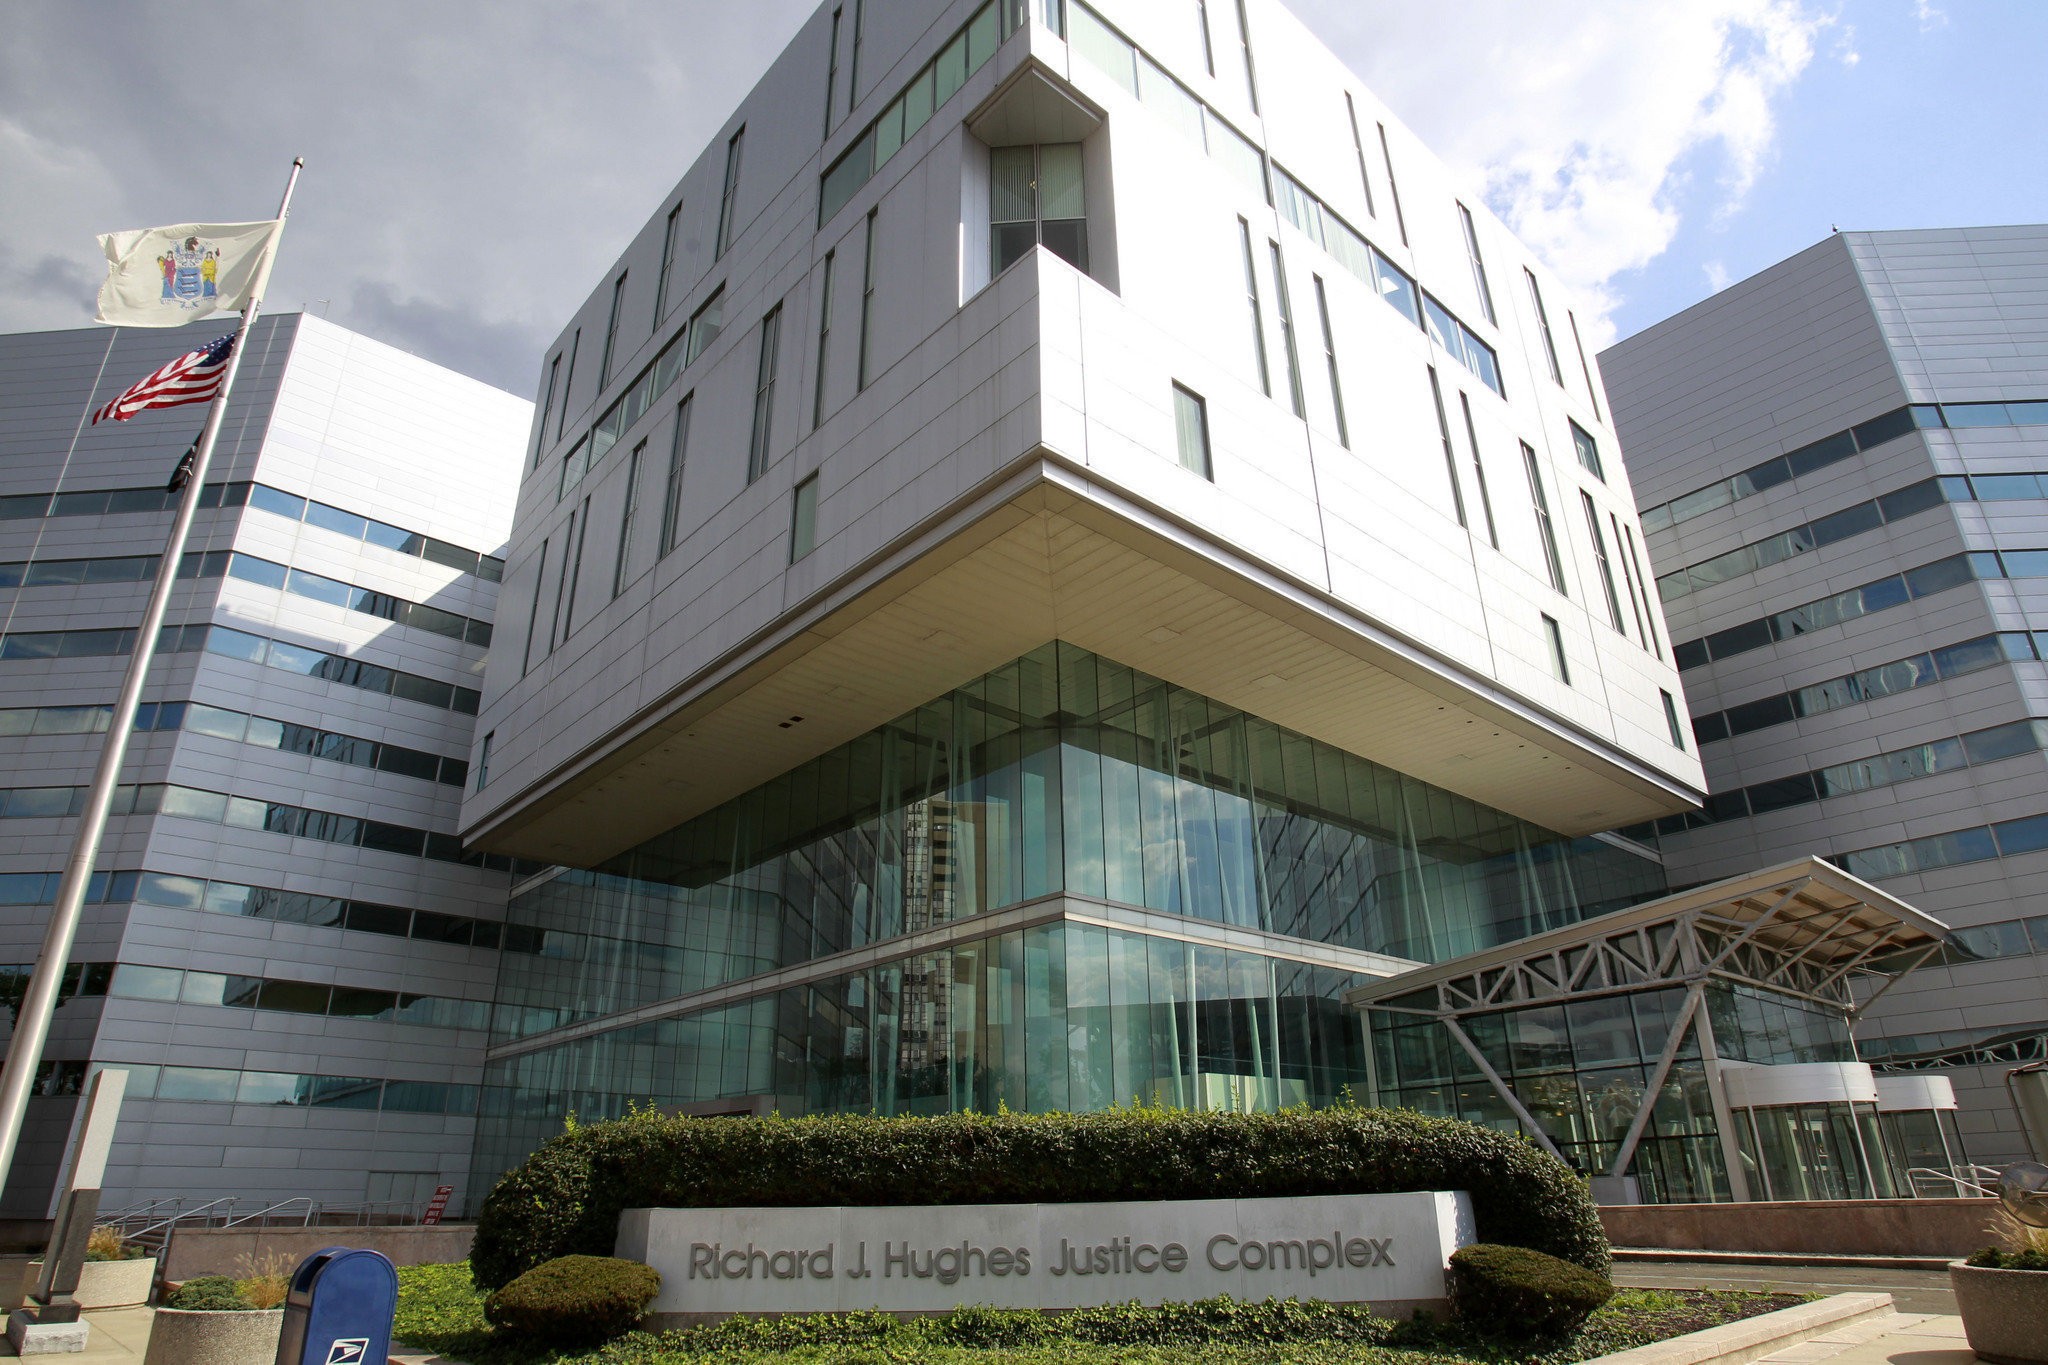 NJ Attorney General's Office at the Richard J. Hughes Justice Complex